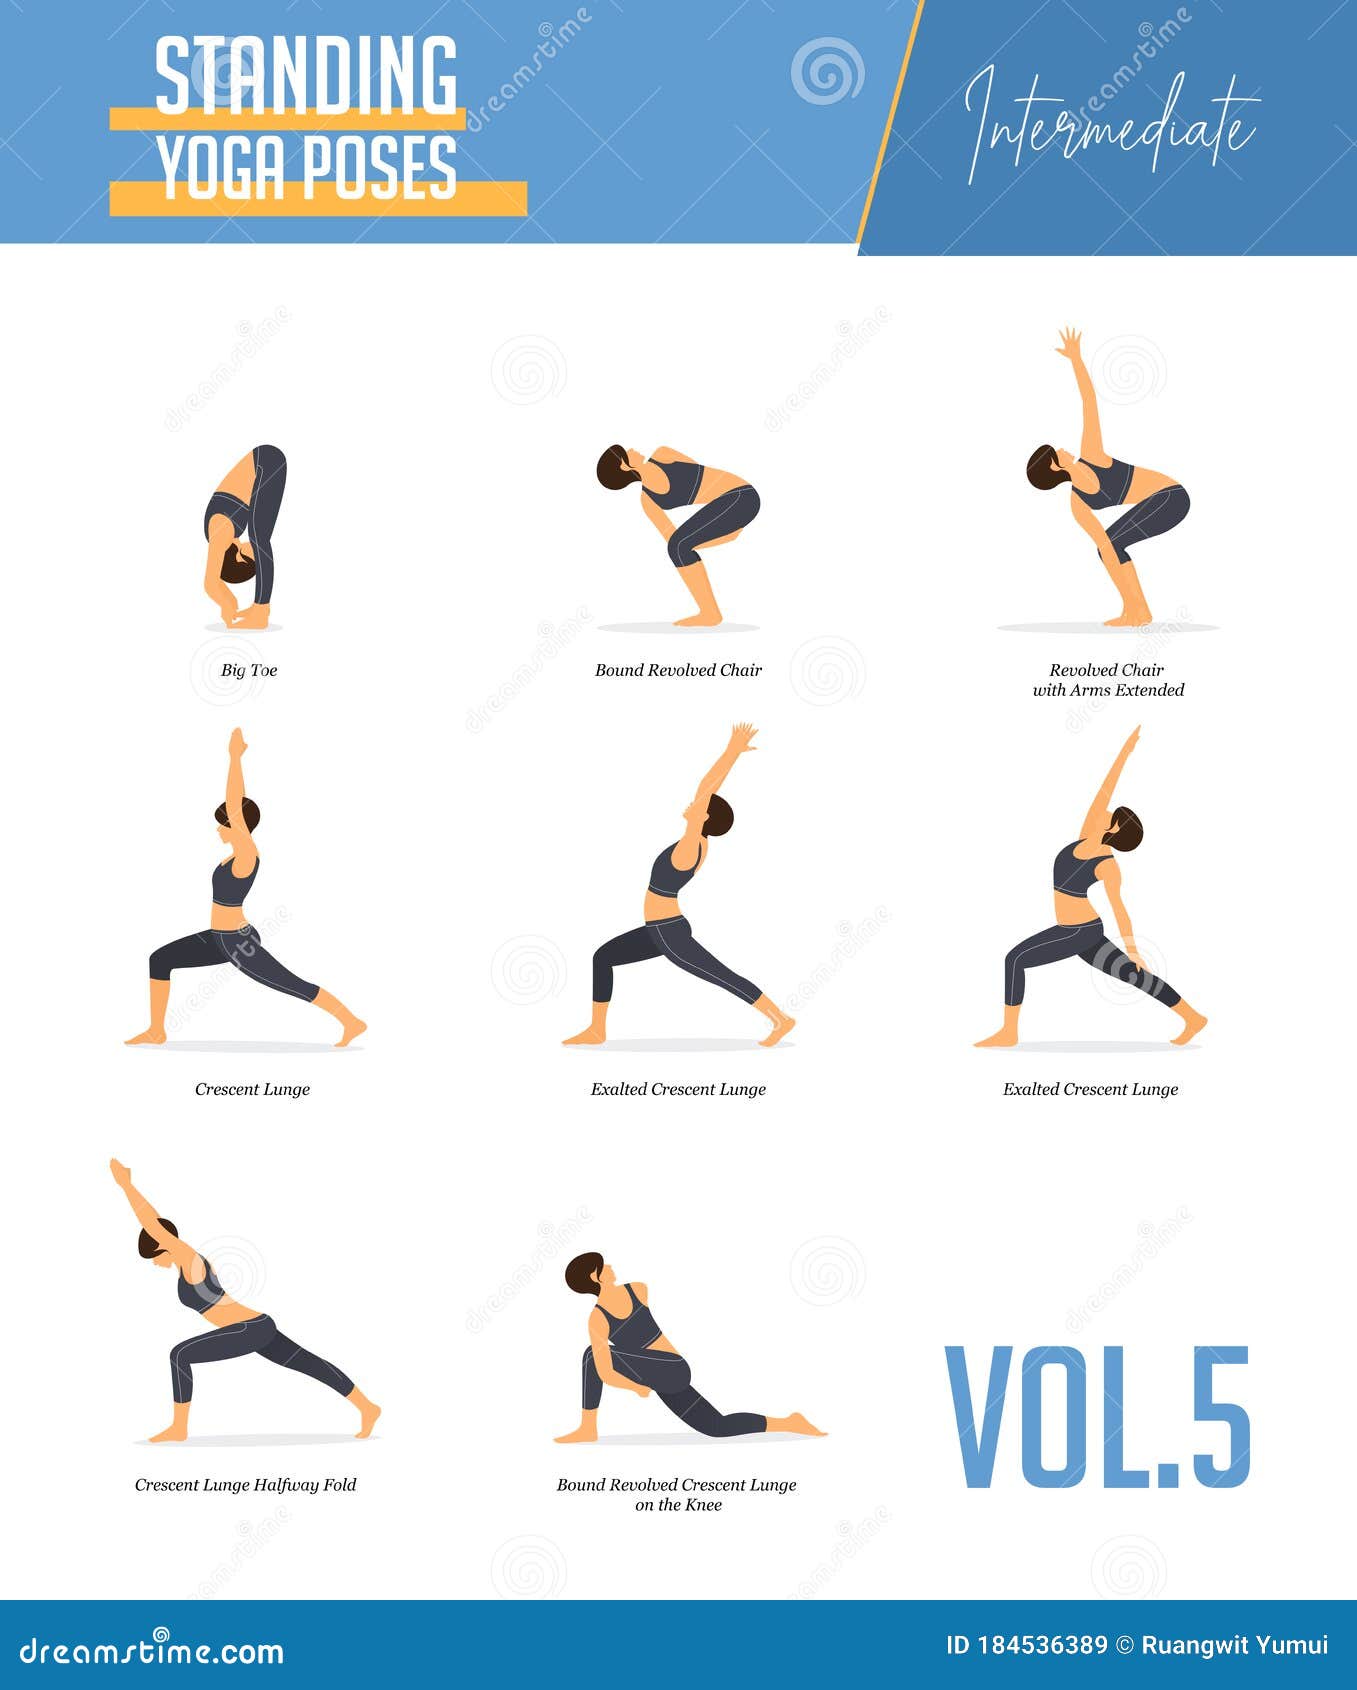 Yoga Poses for Concept of Balancing and Standing Poses in Flat Design ...